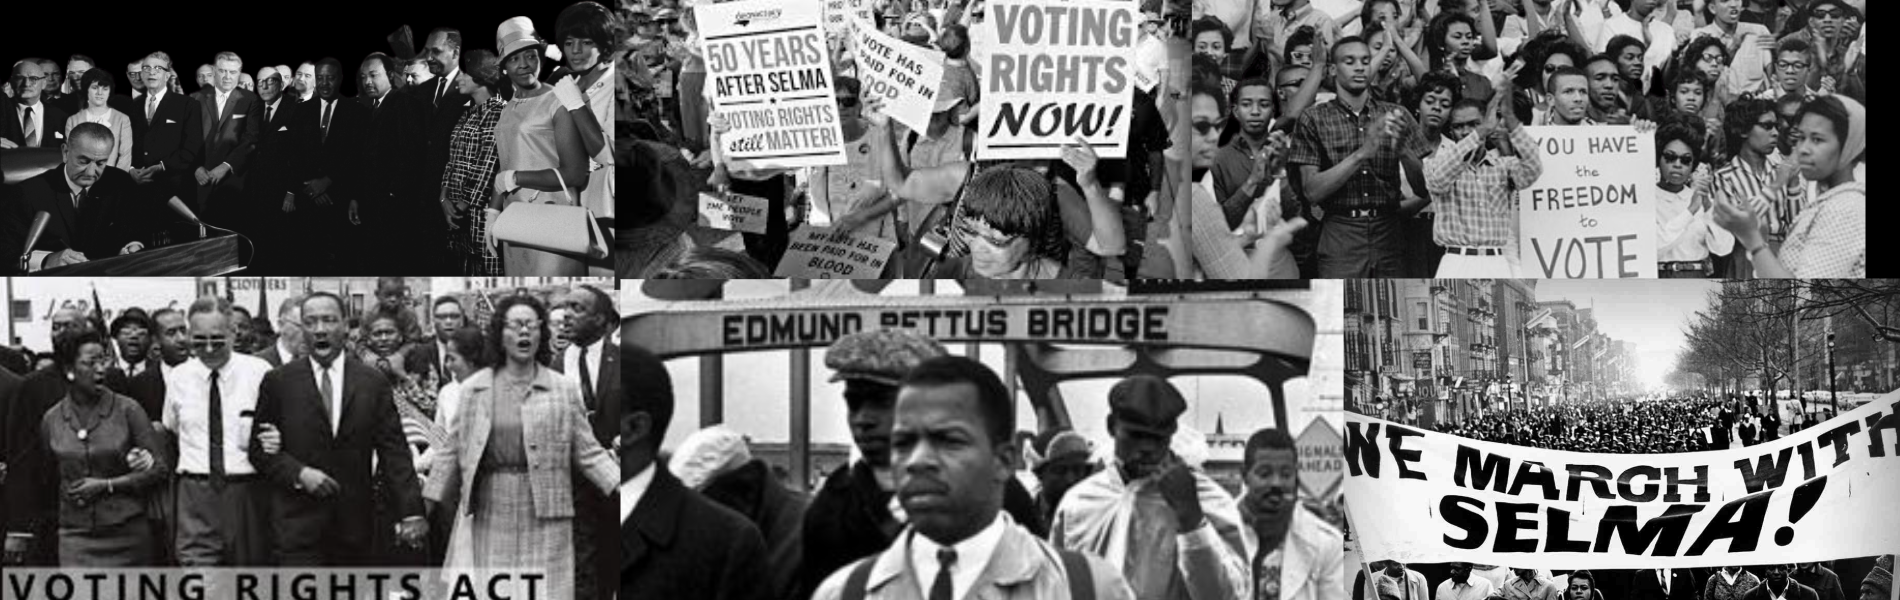 Voting Rights Movement